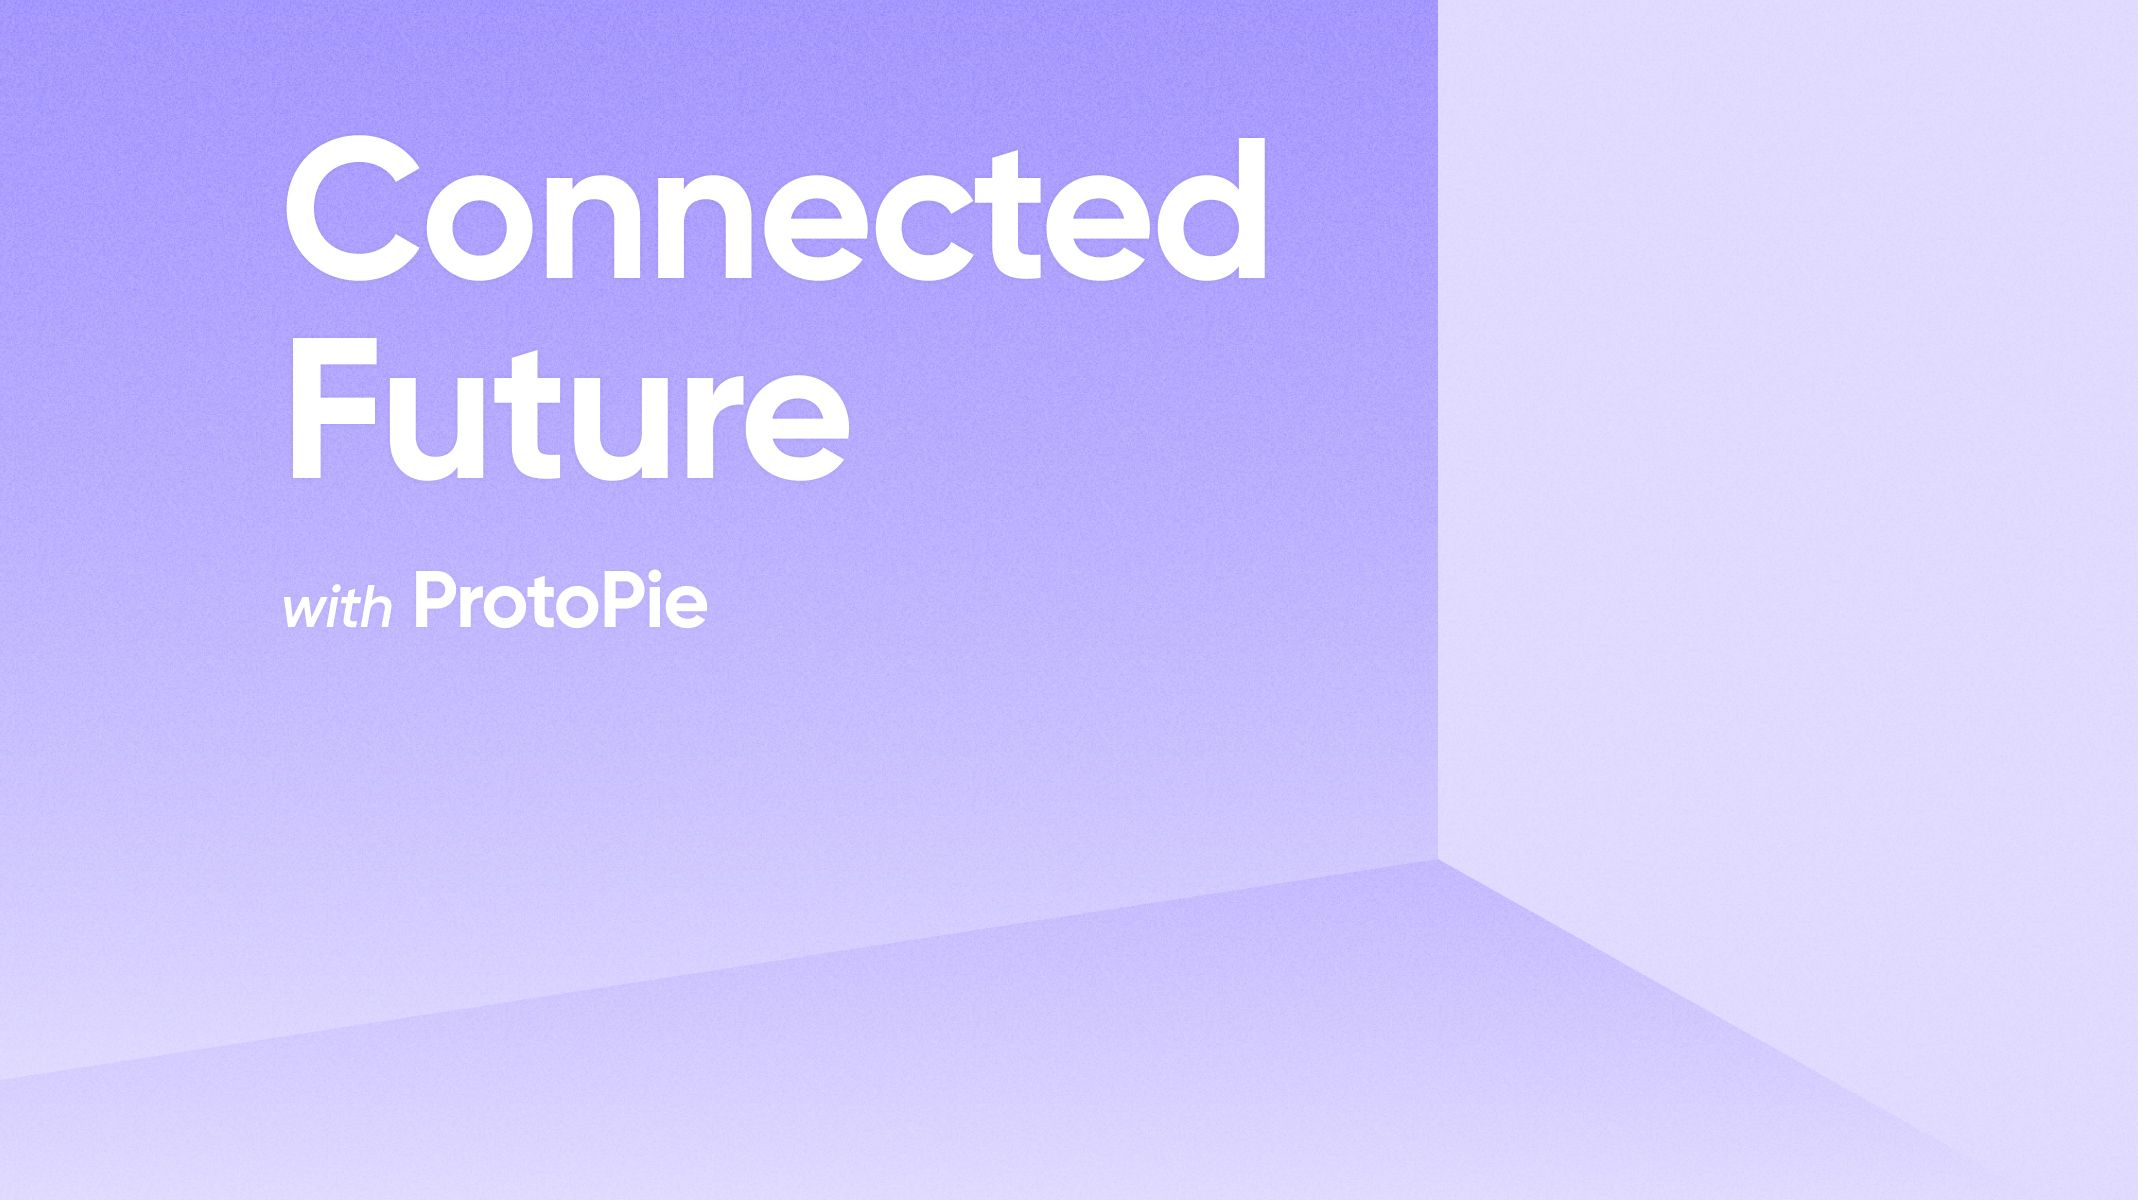 $8M for ProtoPie to Accelerate the Connected Future thumbnail